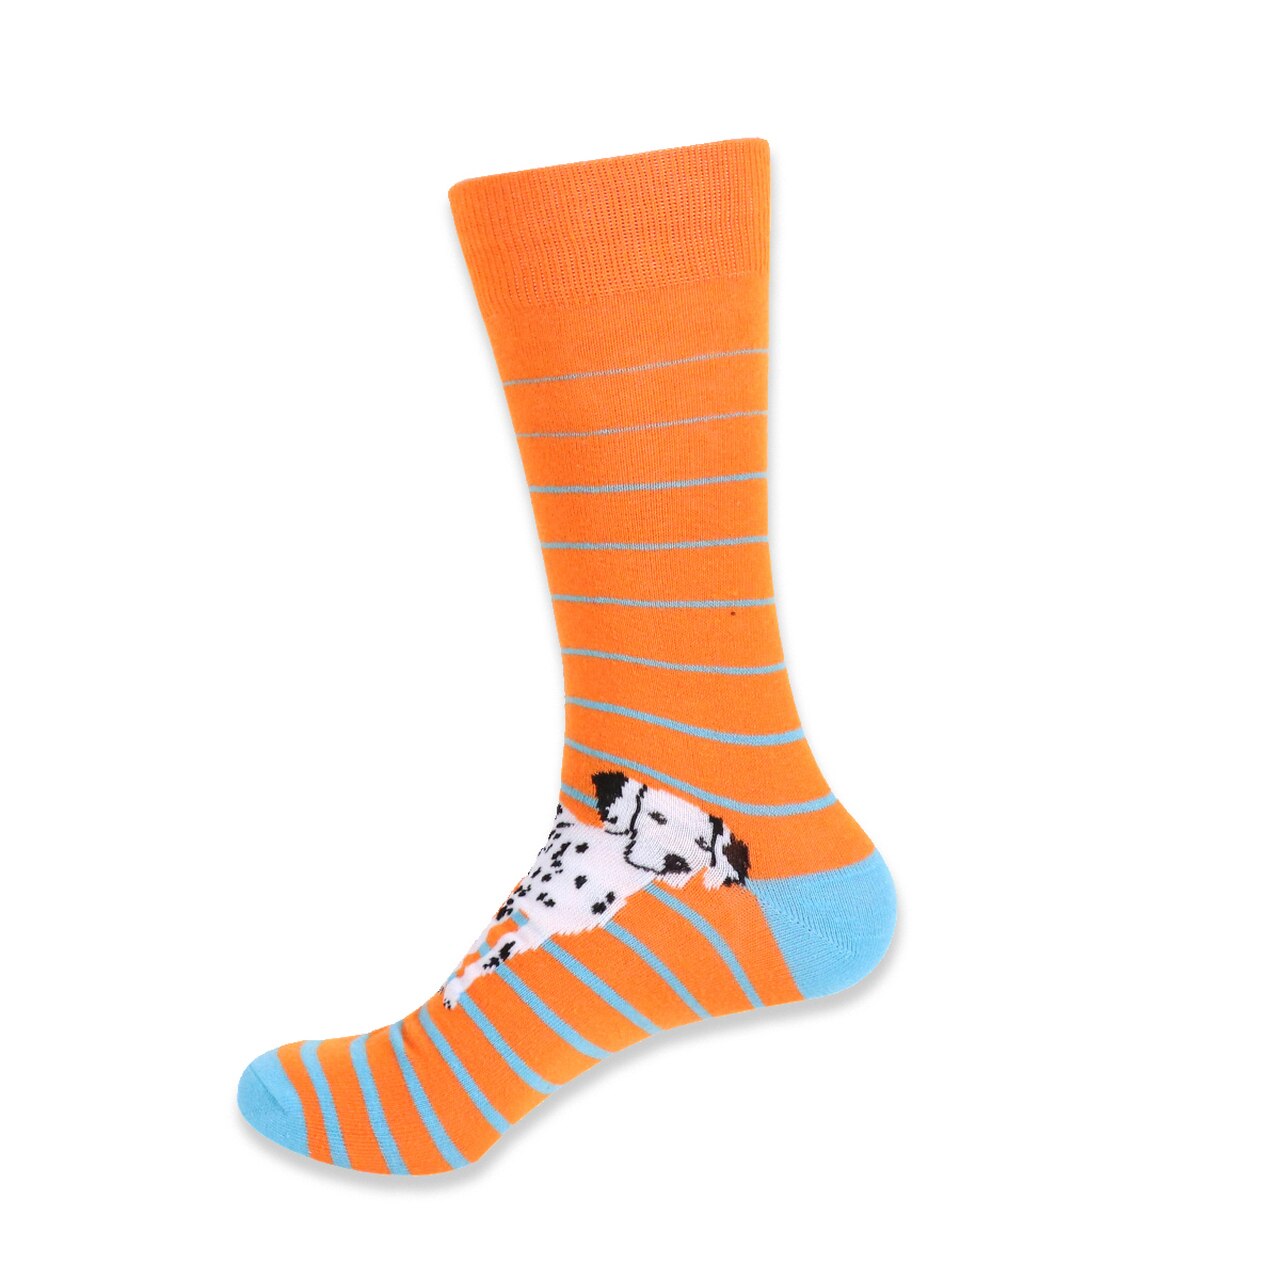 MashasCorner.com   Men's Novelty Dalmatian Dogs Socks  Add some fun to your outfit with our Novelty Socks. These socks are perfect for when you have to maintain being a professional but still have that burning desire to be fun & silly! These socks are super soft & comfy.  70% Cotton, 25% Polyester, 5% spandex Sock size: 10-13 Shoe size: 6-12.5 Machine wash, tumble dry low Imported